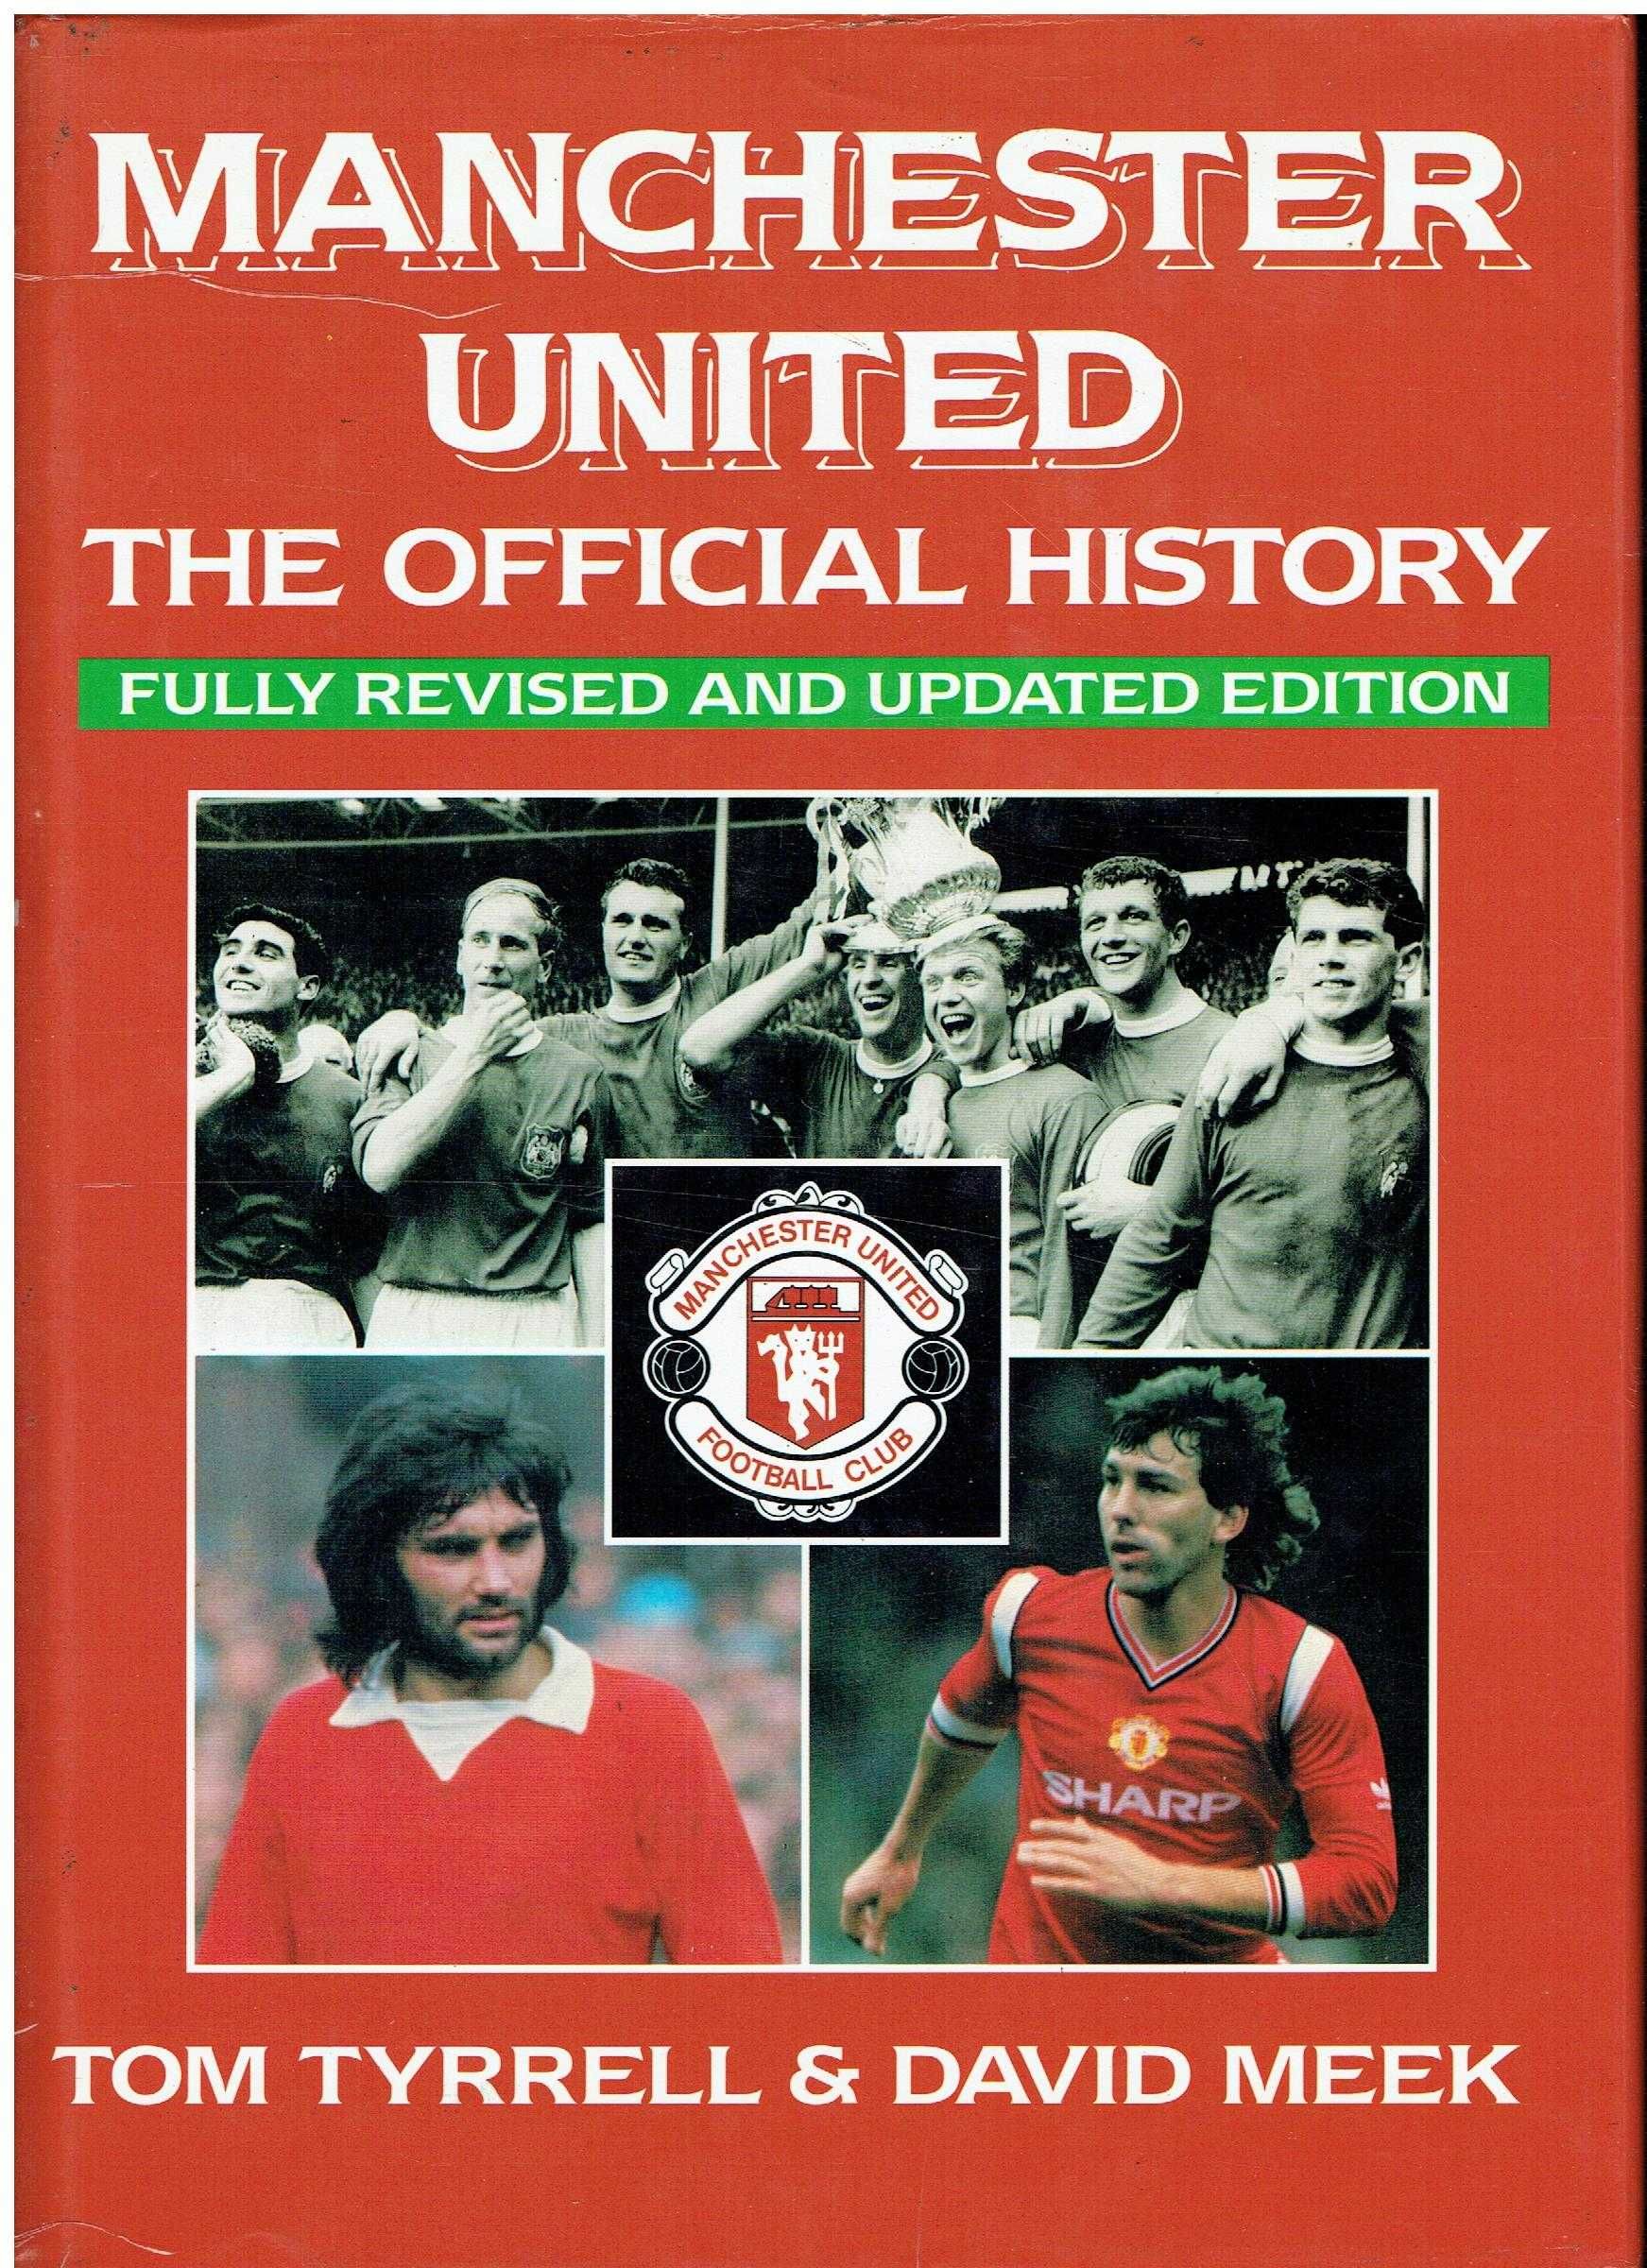 12061

Manchester United: The Official History